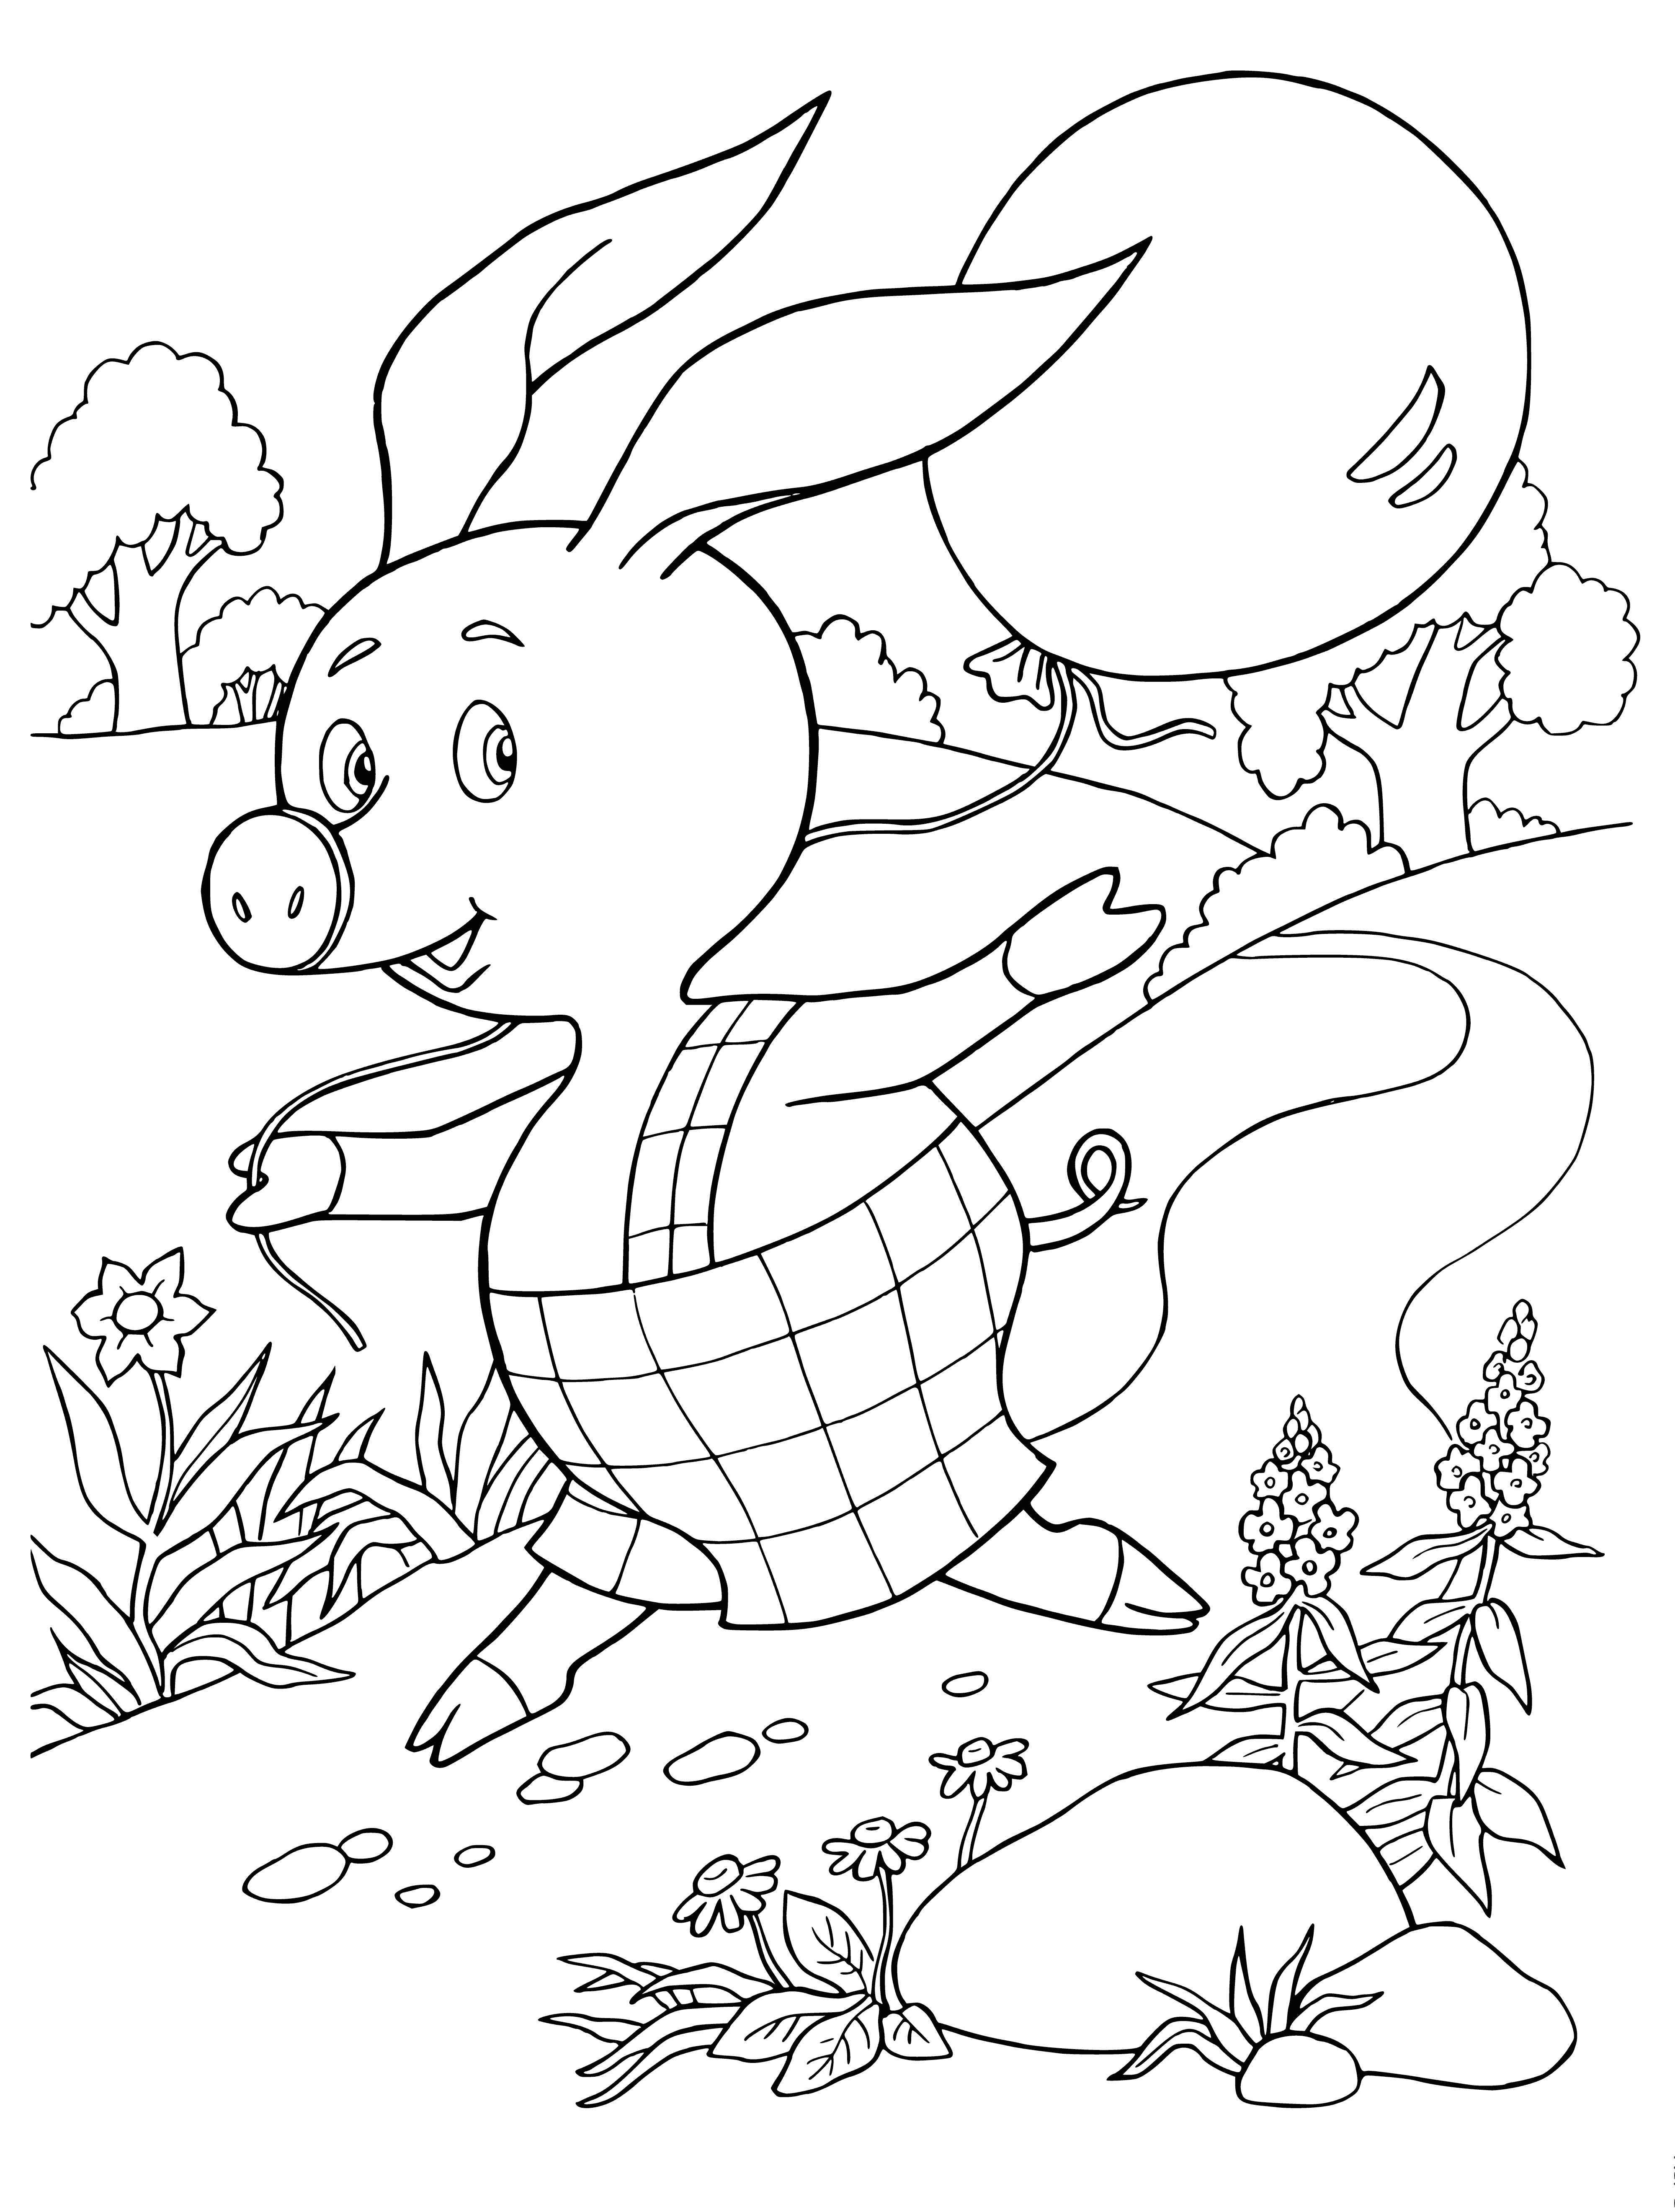 coloring page: Piglet is Winnie's timid but loyal friend. He's always willing to help when needed, even though he's scared of many things.